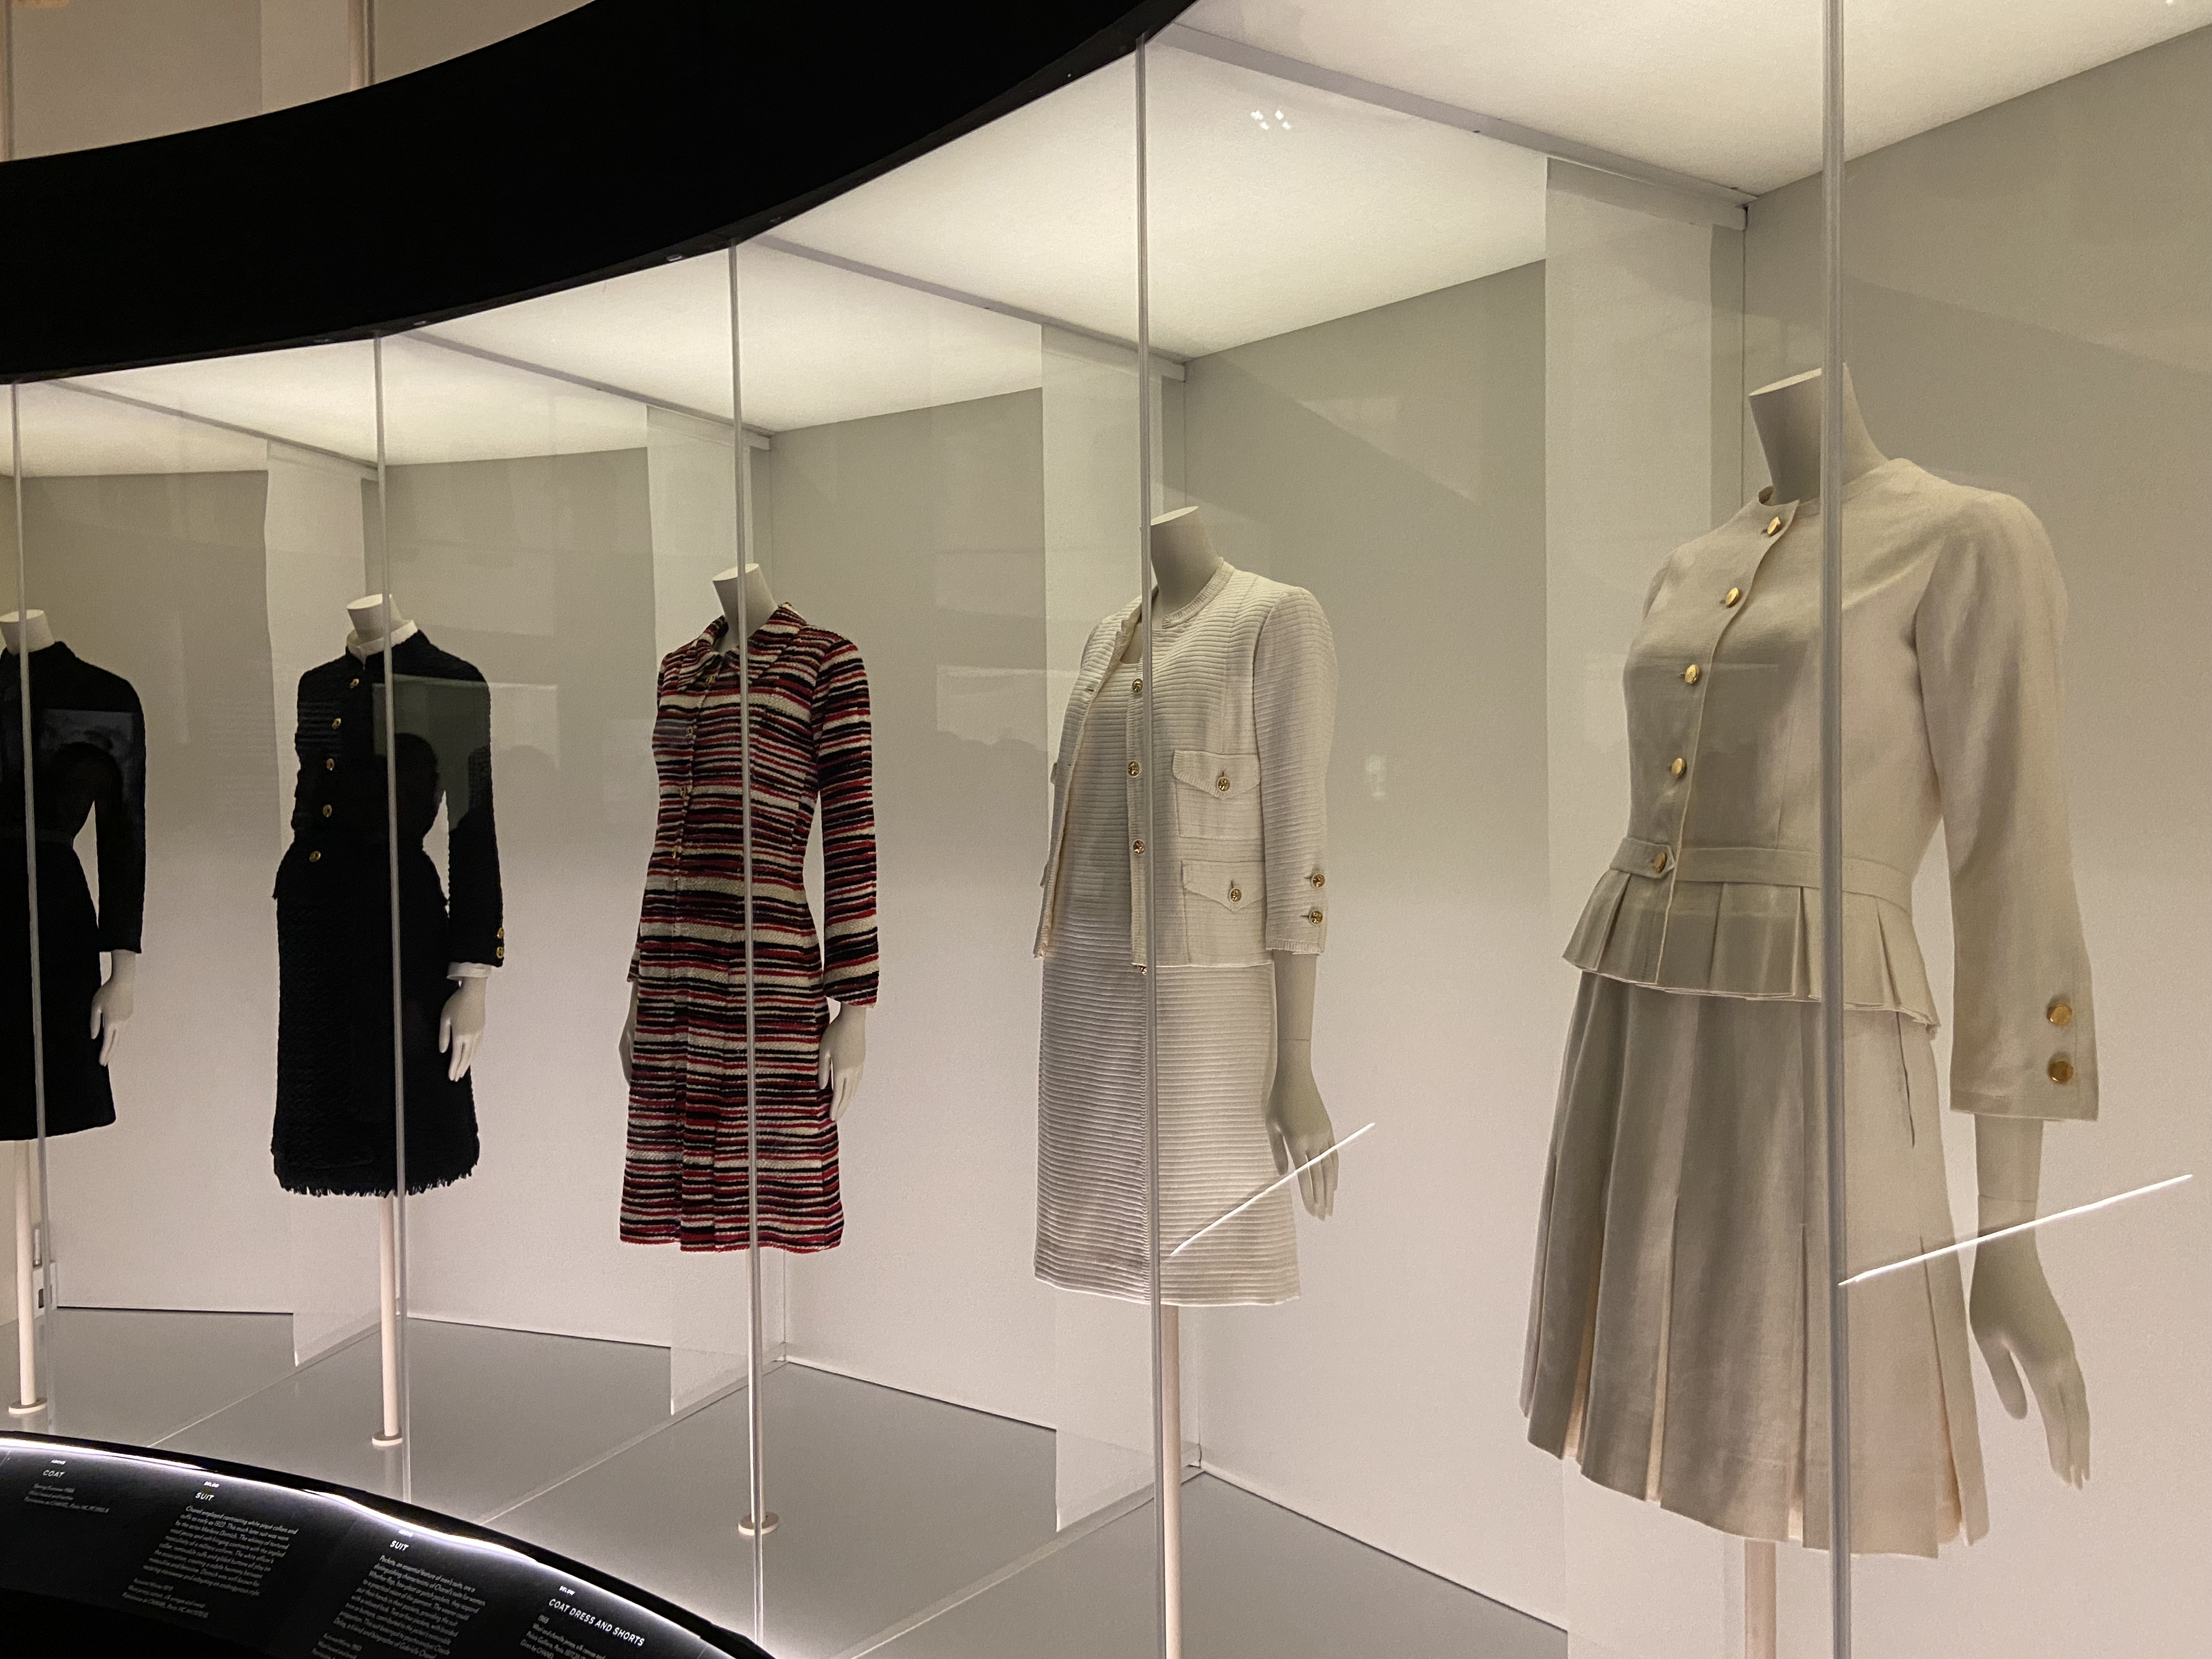 Chanel Takes London with Big V&A Exhibition about the Designer's